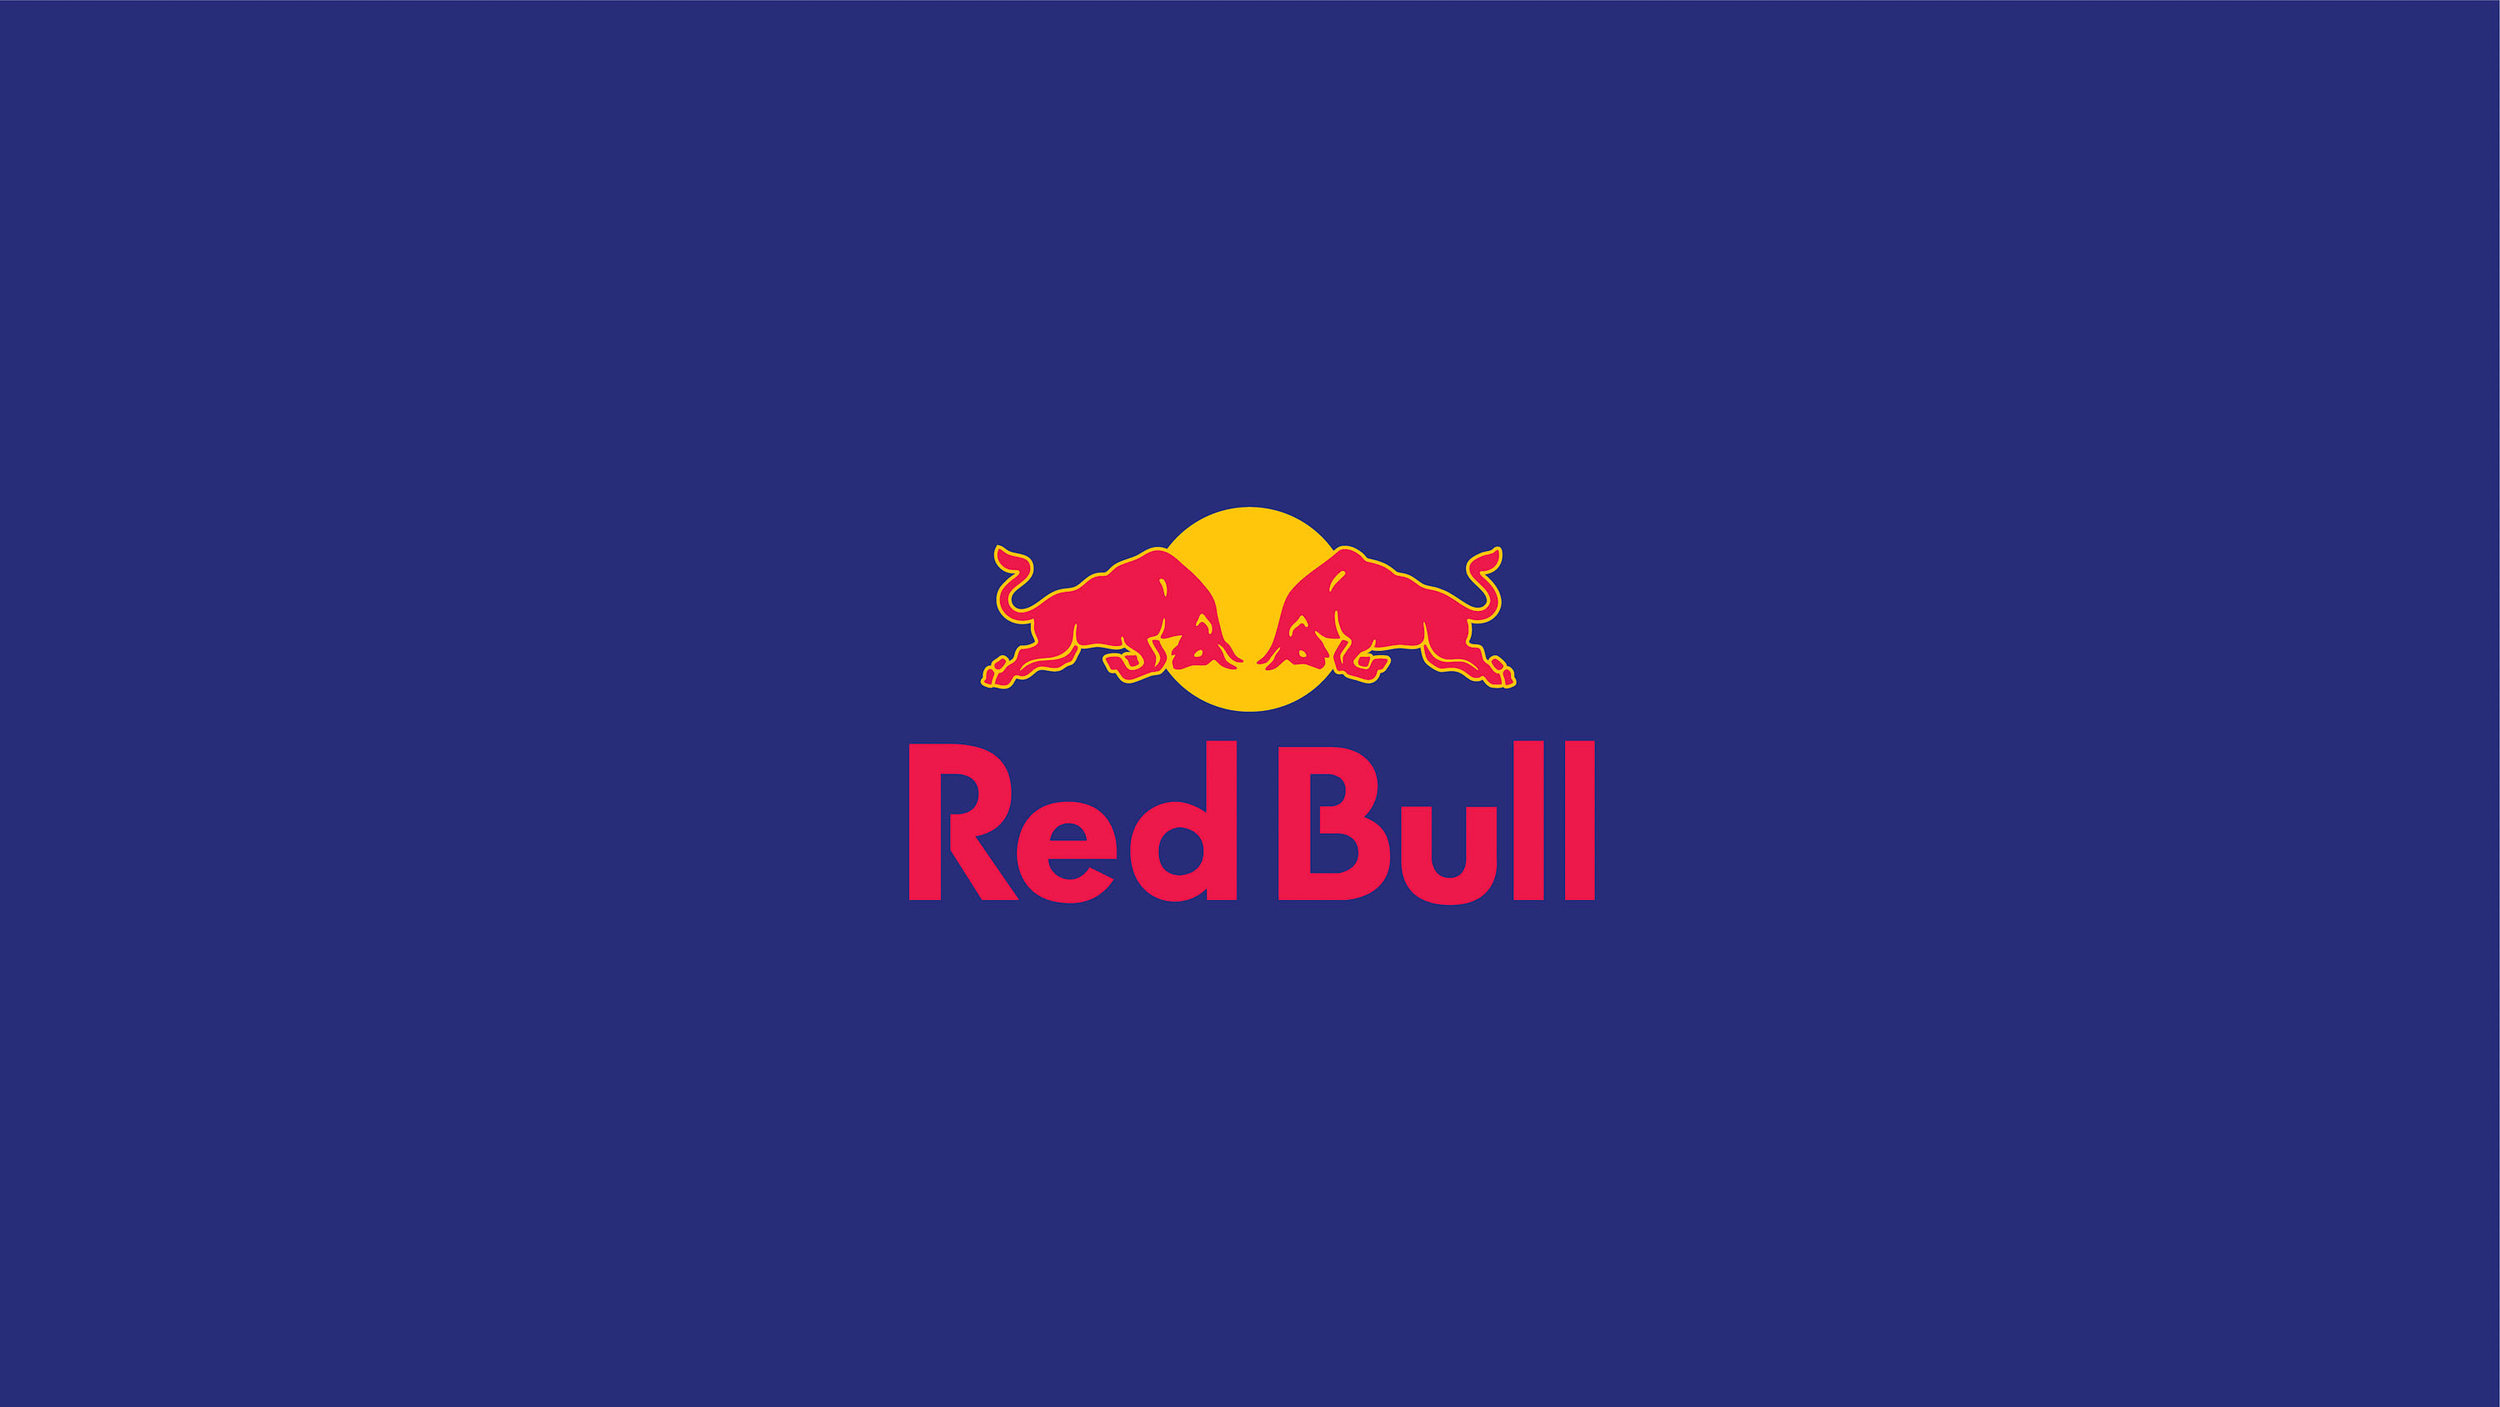 Red Bull Logo: A carbonated taurine drink that vitalizes body and mind, Special formula. 2500x1410 HD Wallpaper.